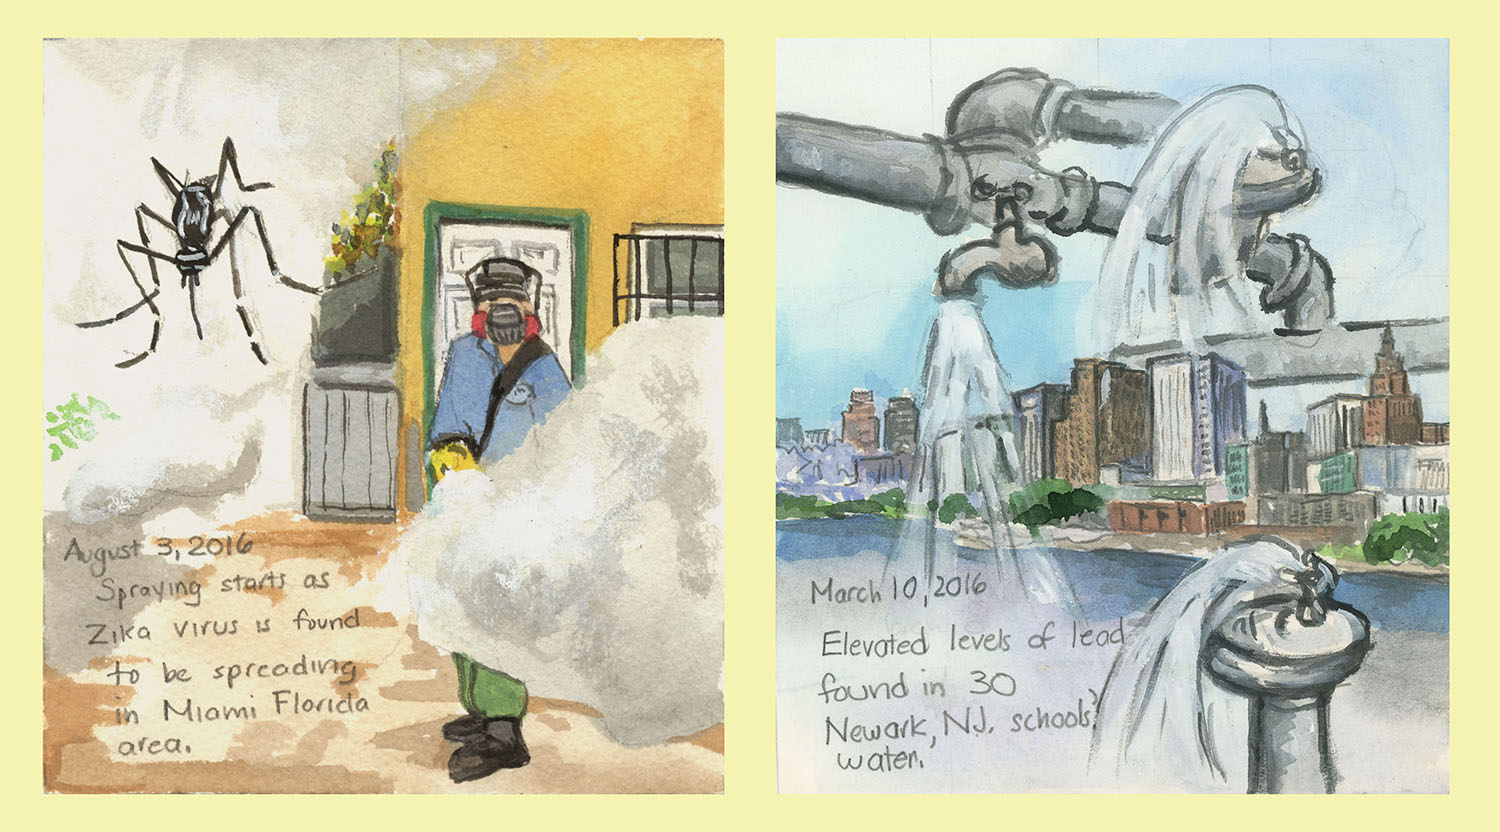 (LEFT): Day 256 (Aug. 3, 2016). Watercolor, gouache, graphite on paper, 6 x 5 ½ in. <i>Spraying starts as Zika virus is found to be spreading in Miami Florida area.</i> (RIGHT): Day 110 (March 10, 2016). Watercolor, gouache, graphite on paper, 7 x 6 in. <i>Elevated levels of lead found in 30 Newark, NJ, schools’ water.</i>